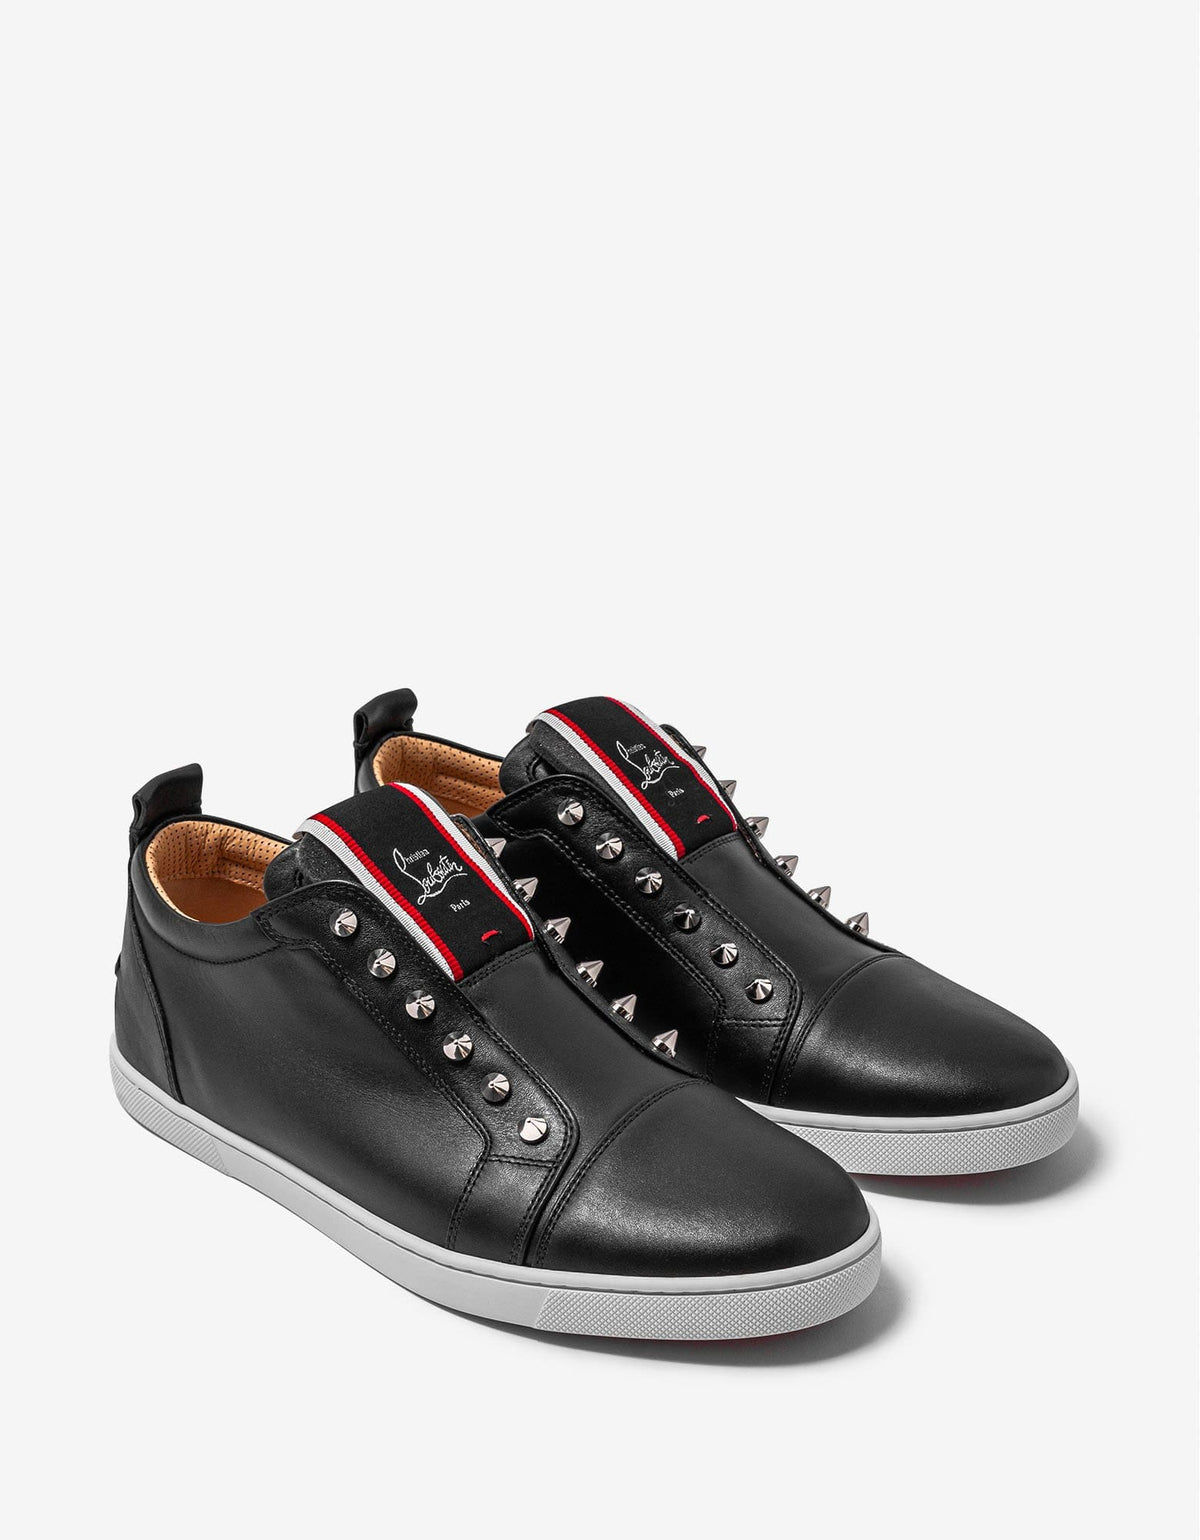 Christian Louboutin F.A.V Fique A Vontade Black Leather Trainers